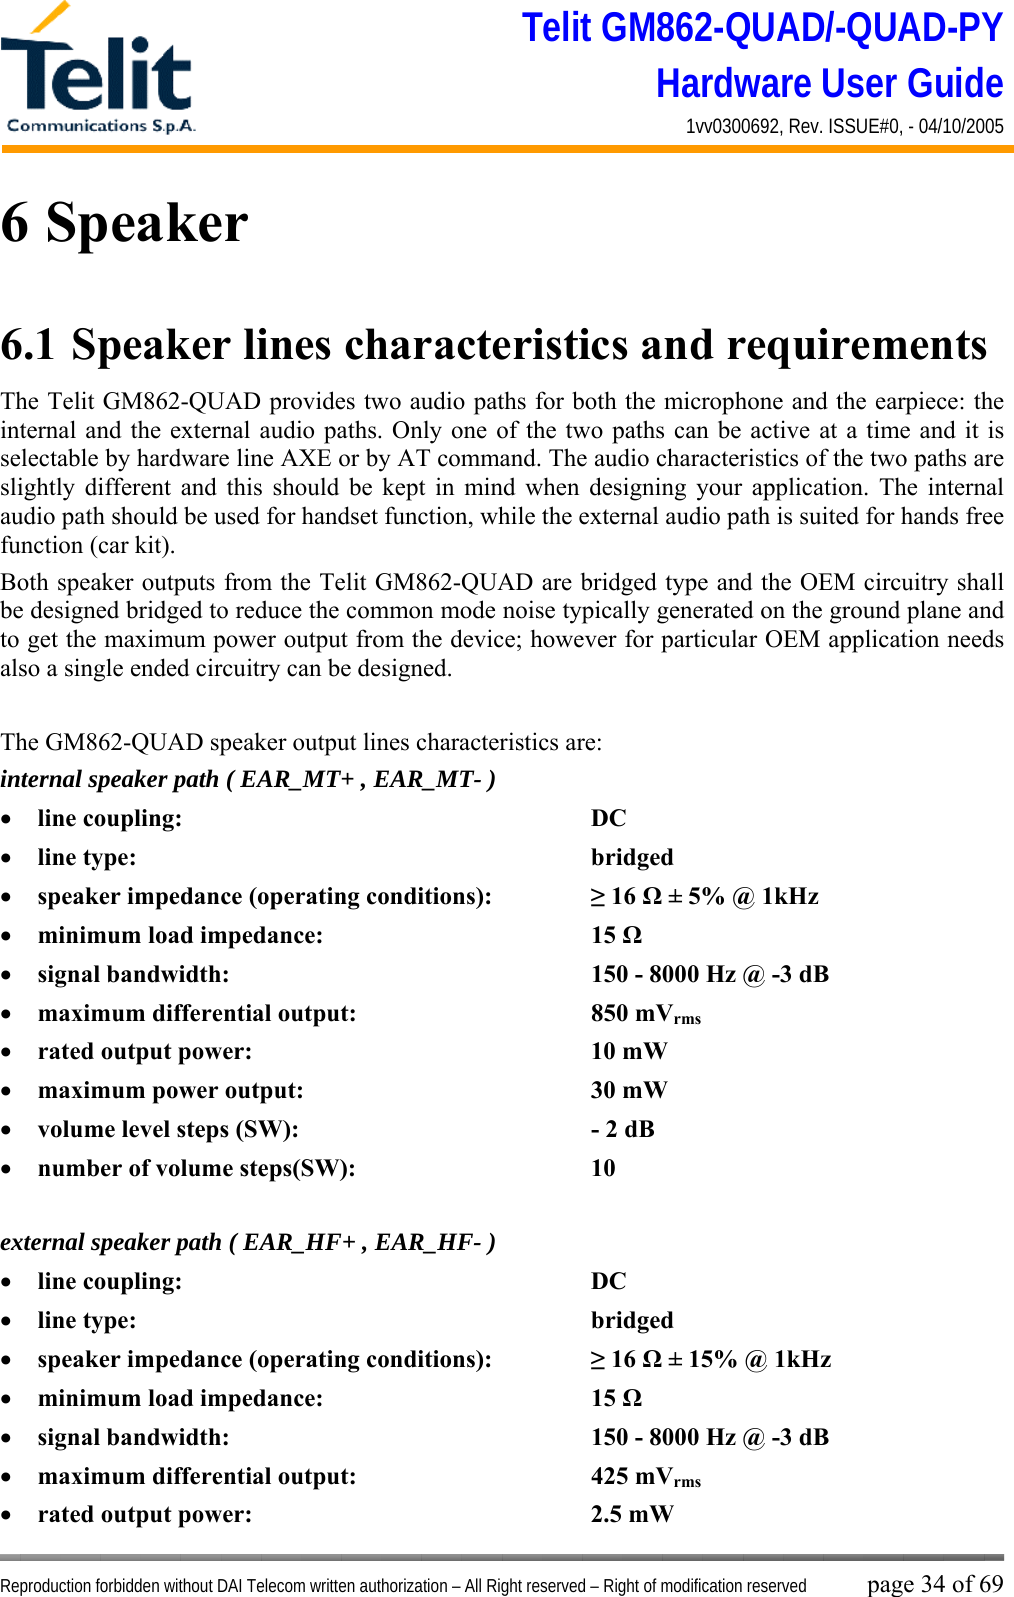 Telit GM862-QUAD/-QUAD-PY Hardware User Guide 1vv0300692, Rev. ISSUE#0, - 04/10/2005   Reproduction forbidden without DAI Telecom written authorization – All Right reserved – Right of modification reserved page 34 of 69 6 Speaker 6.1  Speaker lines characteristics and requirements  The Telit GM862-QUAD provides two audio paths for both the microphone and the earpiece: the internal and the external audio paths. Only one of the two paths can be active at a time and it is selectable by hardware line AXE or by AT command. The audio characteristics of the two paths are slightly different and this should be kept in mind when designing your application. The internal audio path should be used for handset function, while the external audio path is suited for hands free function (car kit). Both speaker outputs from the Telit GM862-QUAD are bridged type and the OEM circuitry shall be designed bridged to reduce the common mode noise typically generated on the ground plane and to get the maximum power output from the device; however for particular OEM application needs also a single ended circuitry can be designed.  The GM862-QUAD speaker output lines characteristics are: internal speaker path ( EAR_MT+ , EAR_MT- ) •  line coupling:      DC  •  line type:       bridged •  speaker impedance (operating conditions):    ≥ 16 Ω ± 5% @ 1kHz •  minimum load impedance:    15 Ω •  signal bandwidth:          150 - 8000 Hz @ -3 dB  •  maximum differential output:    850 mVrms •  rated output power:     10 mW •  maximum power output:    30 mW •  volume level steps (SW):        - 2 dB •  number of volume steps(SW):    10   external speaker path ( EAR_HF+ , EAR_HF- ) •  line coupling:      DC  •  line type:       bridged •  speaker impedance (operating conditions):    ≥ 16 Ω ± 15% @ 1kHz •  minimum load impedance:    15 Ω •  signal bandwidth:          150 - 8000 Hz @ -3 dB  •  maximum differential output:    425 mVrms •  rated output power:     2.5 mW 